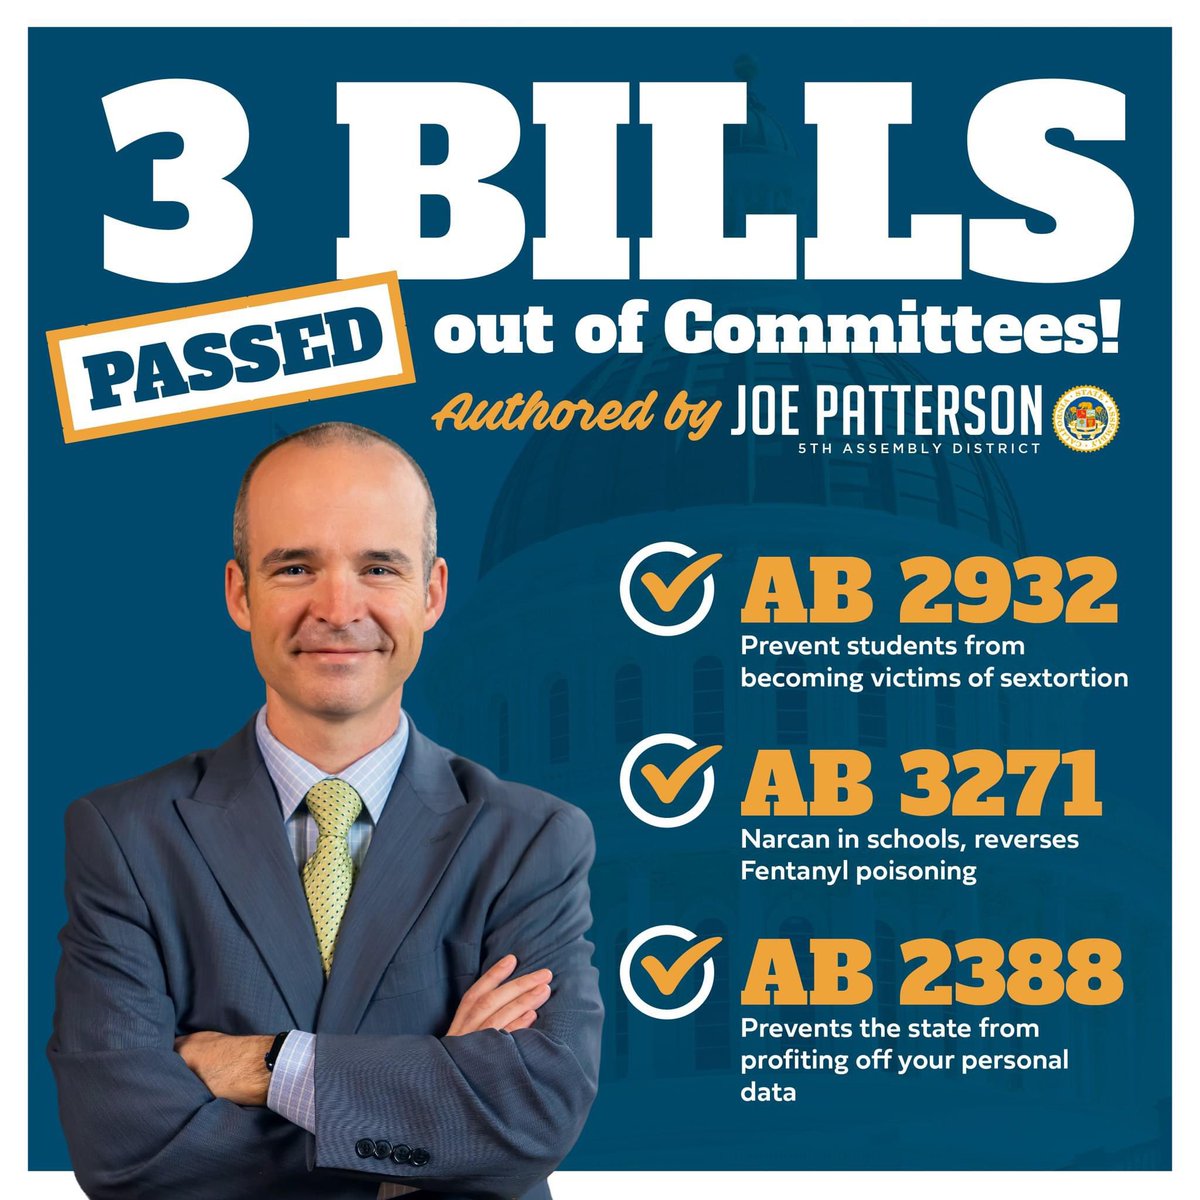 This week THREE of my bills passed out of committees! AB 2932, AB 3271, and AB 2388 are critical bills to protect our residents, especially our students. It’s an honor to fight for you.